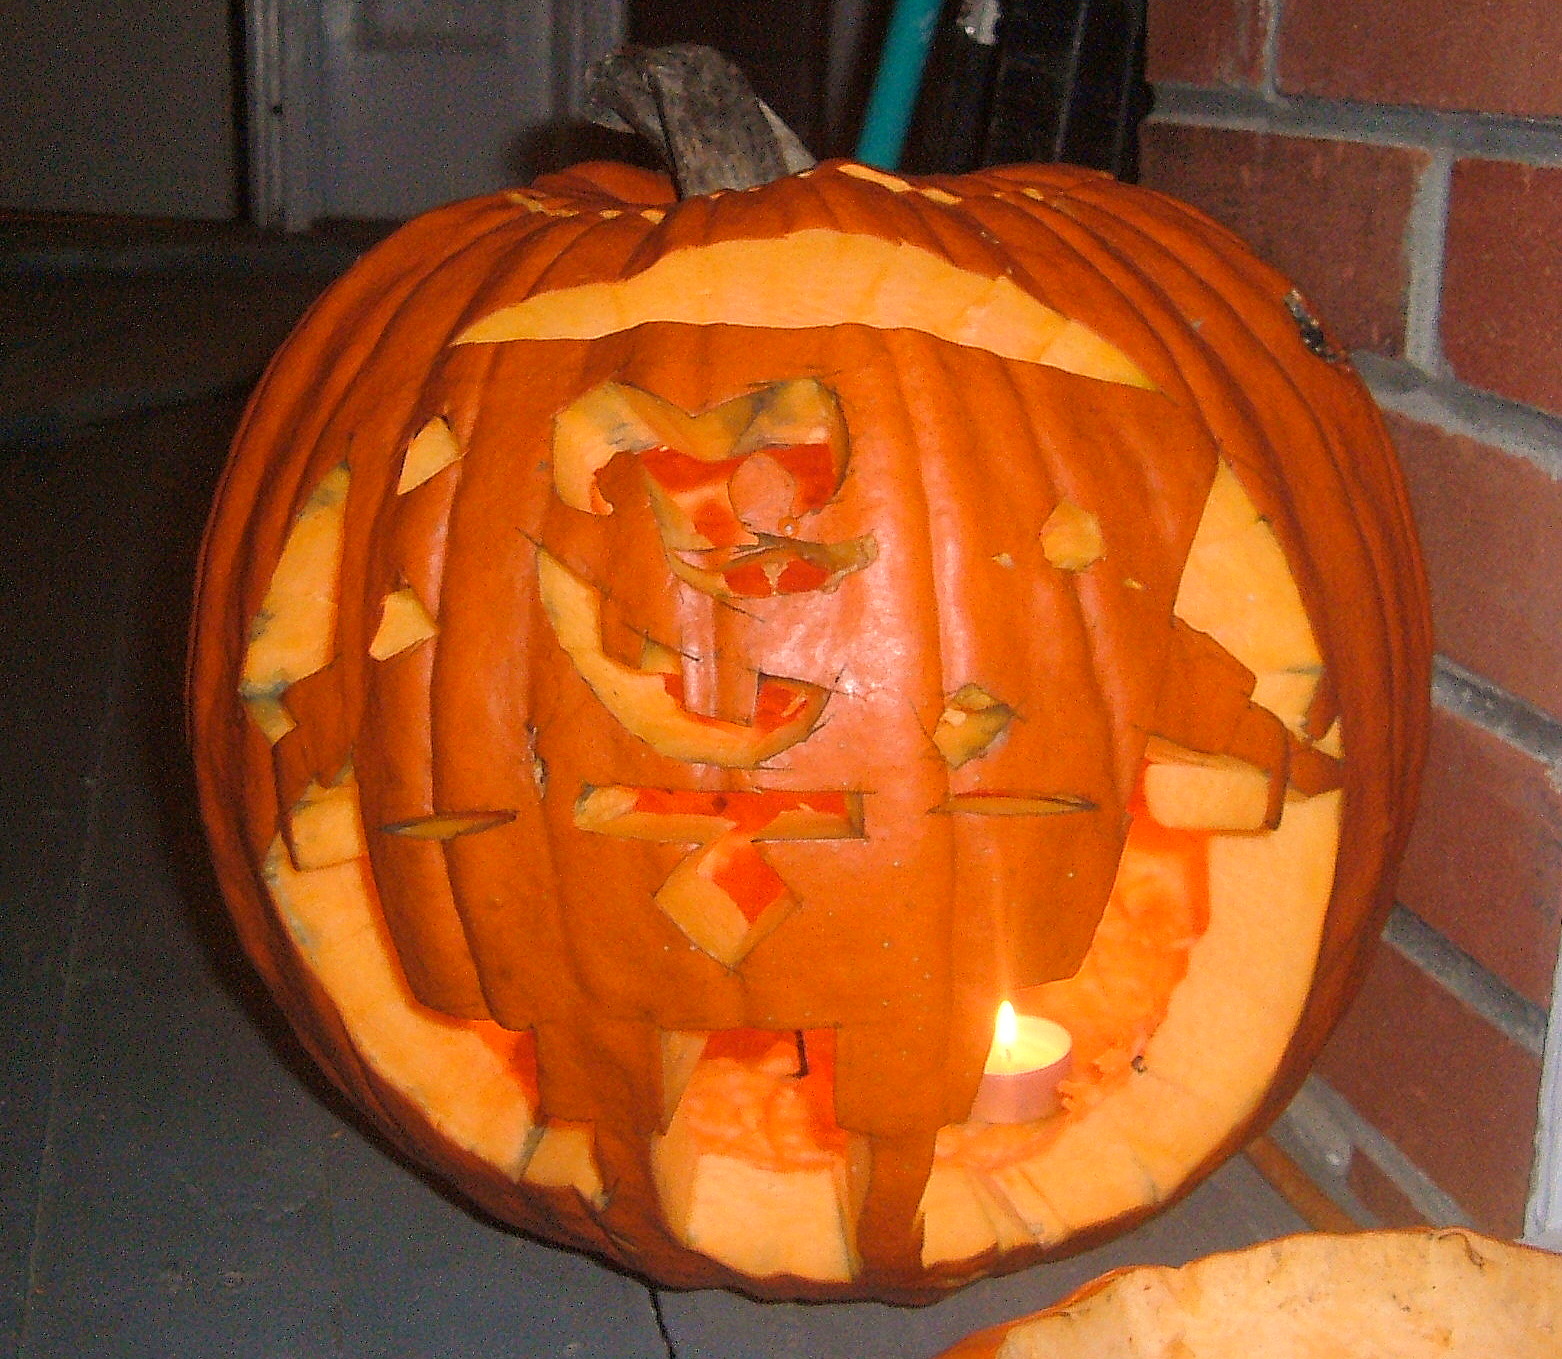 Abundance on a Dime: Making the Most of...Your Jack O' Lantern